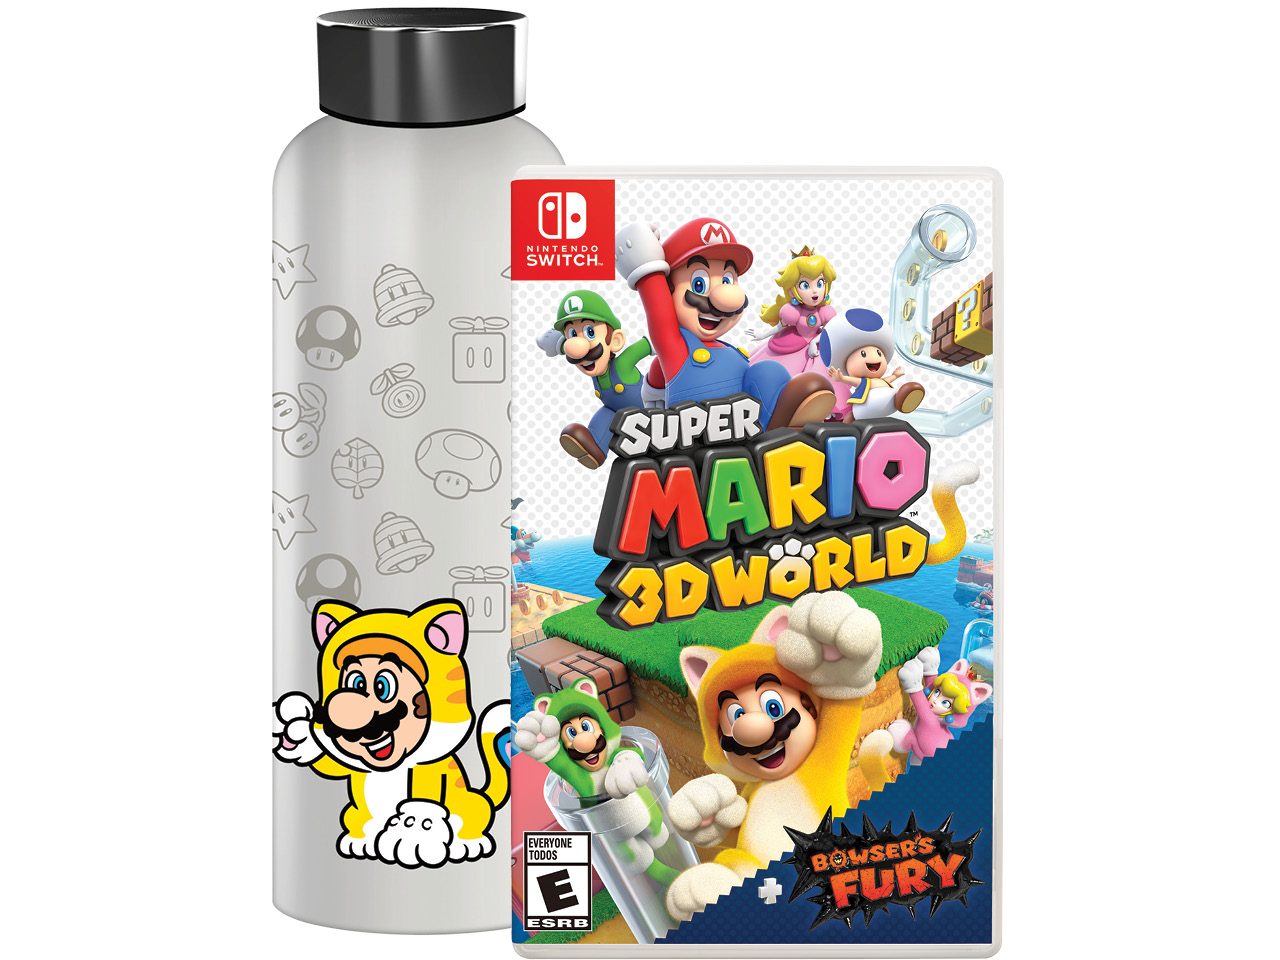 Super Mario 3d World Bowser S Fury Special Editions Compared